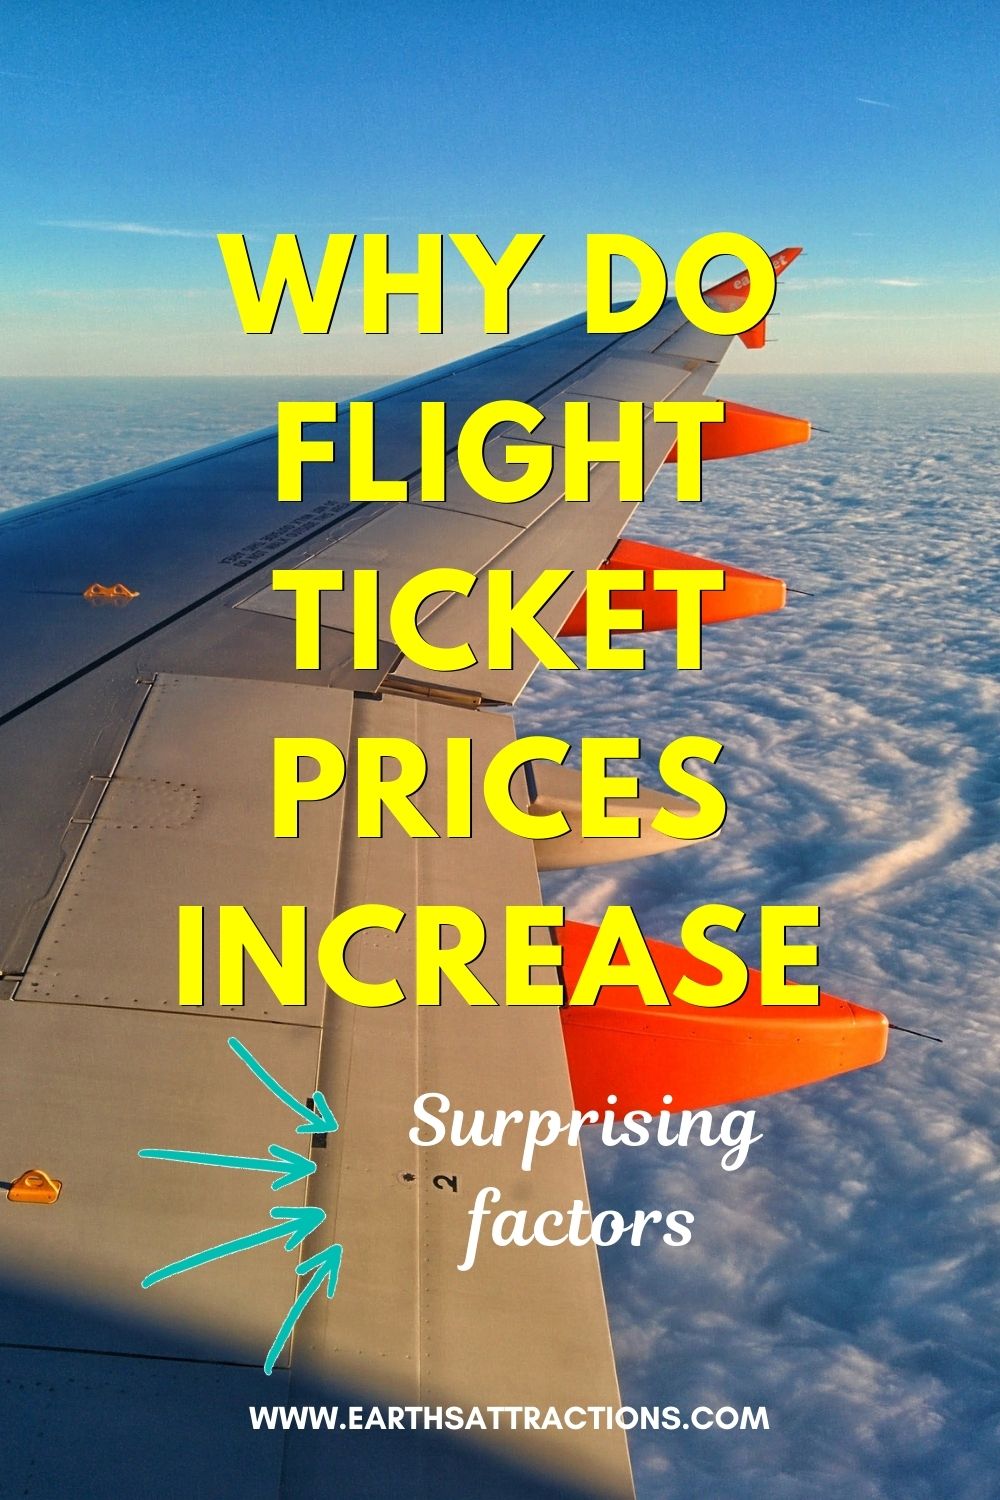 Surprising factors that affect airfares and accommodation prices. Read this article and find out why flight ticket prices increase. These are the unexpected factors that influence accommodation prices #travelfacts #facts #airfare #planetickets #flightticket #flightticketcost #accommodation #accommodationtips #traveltips #secrets 